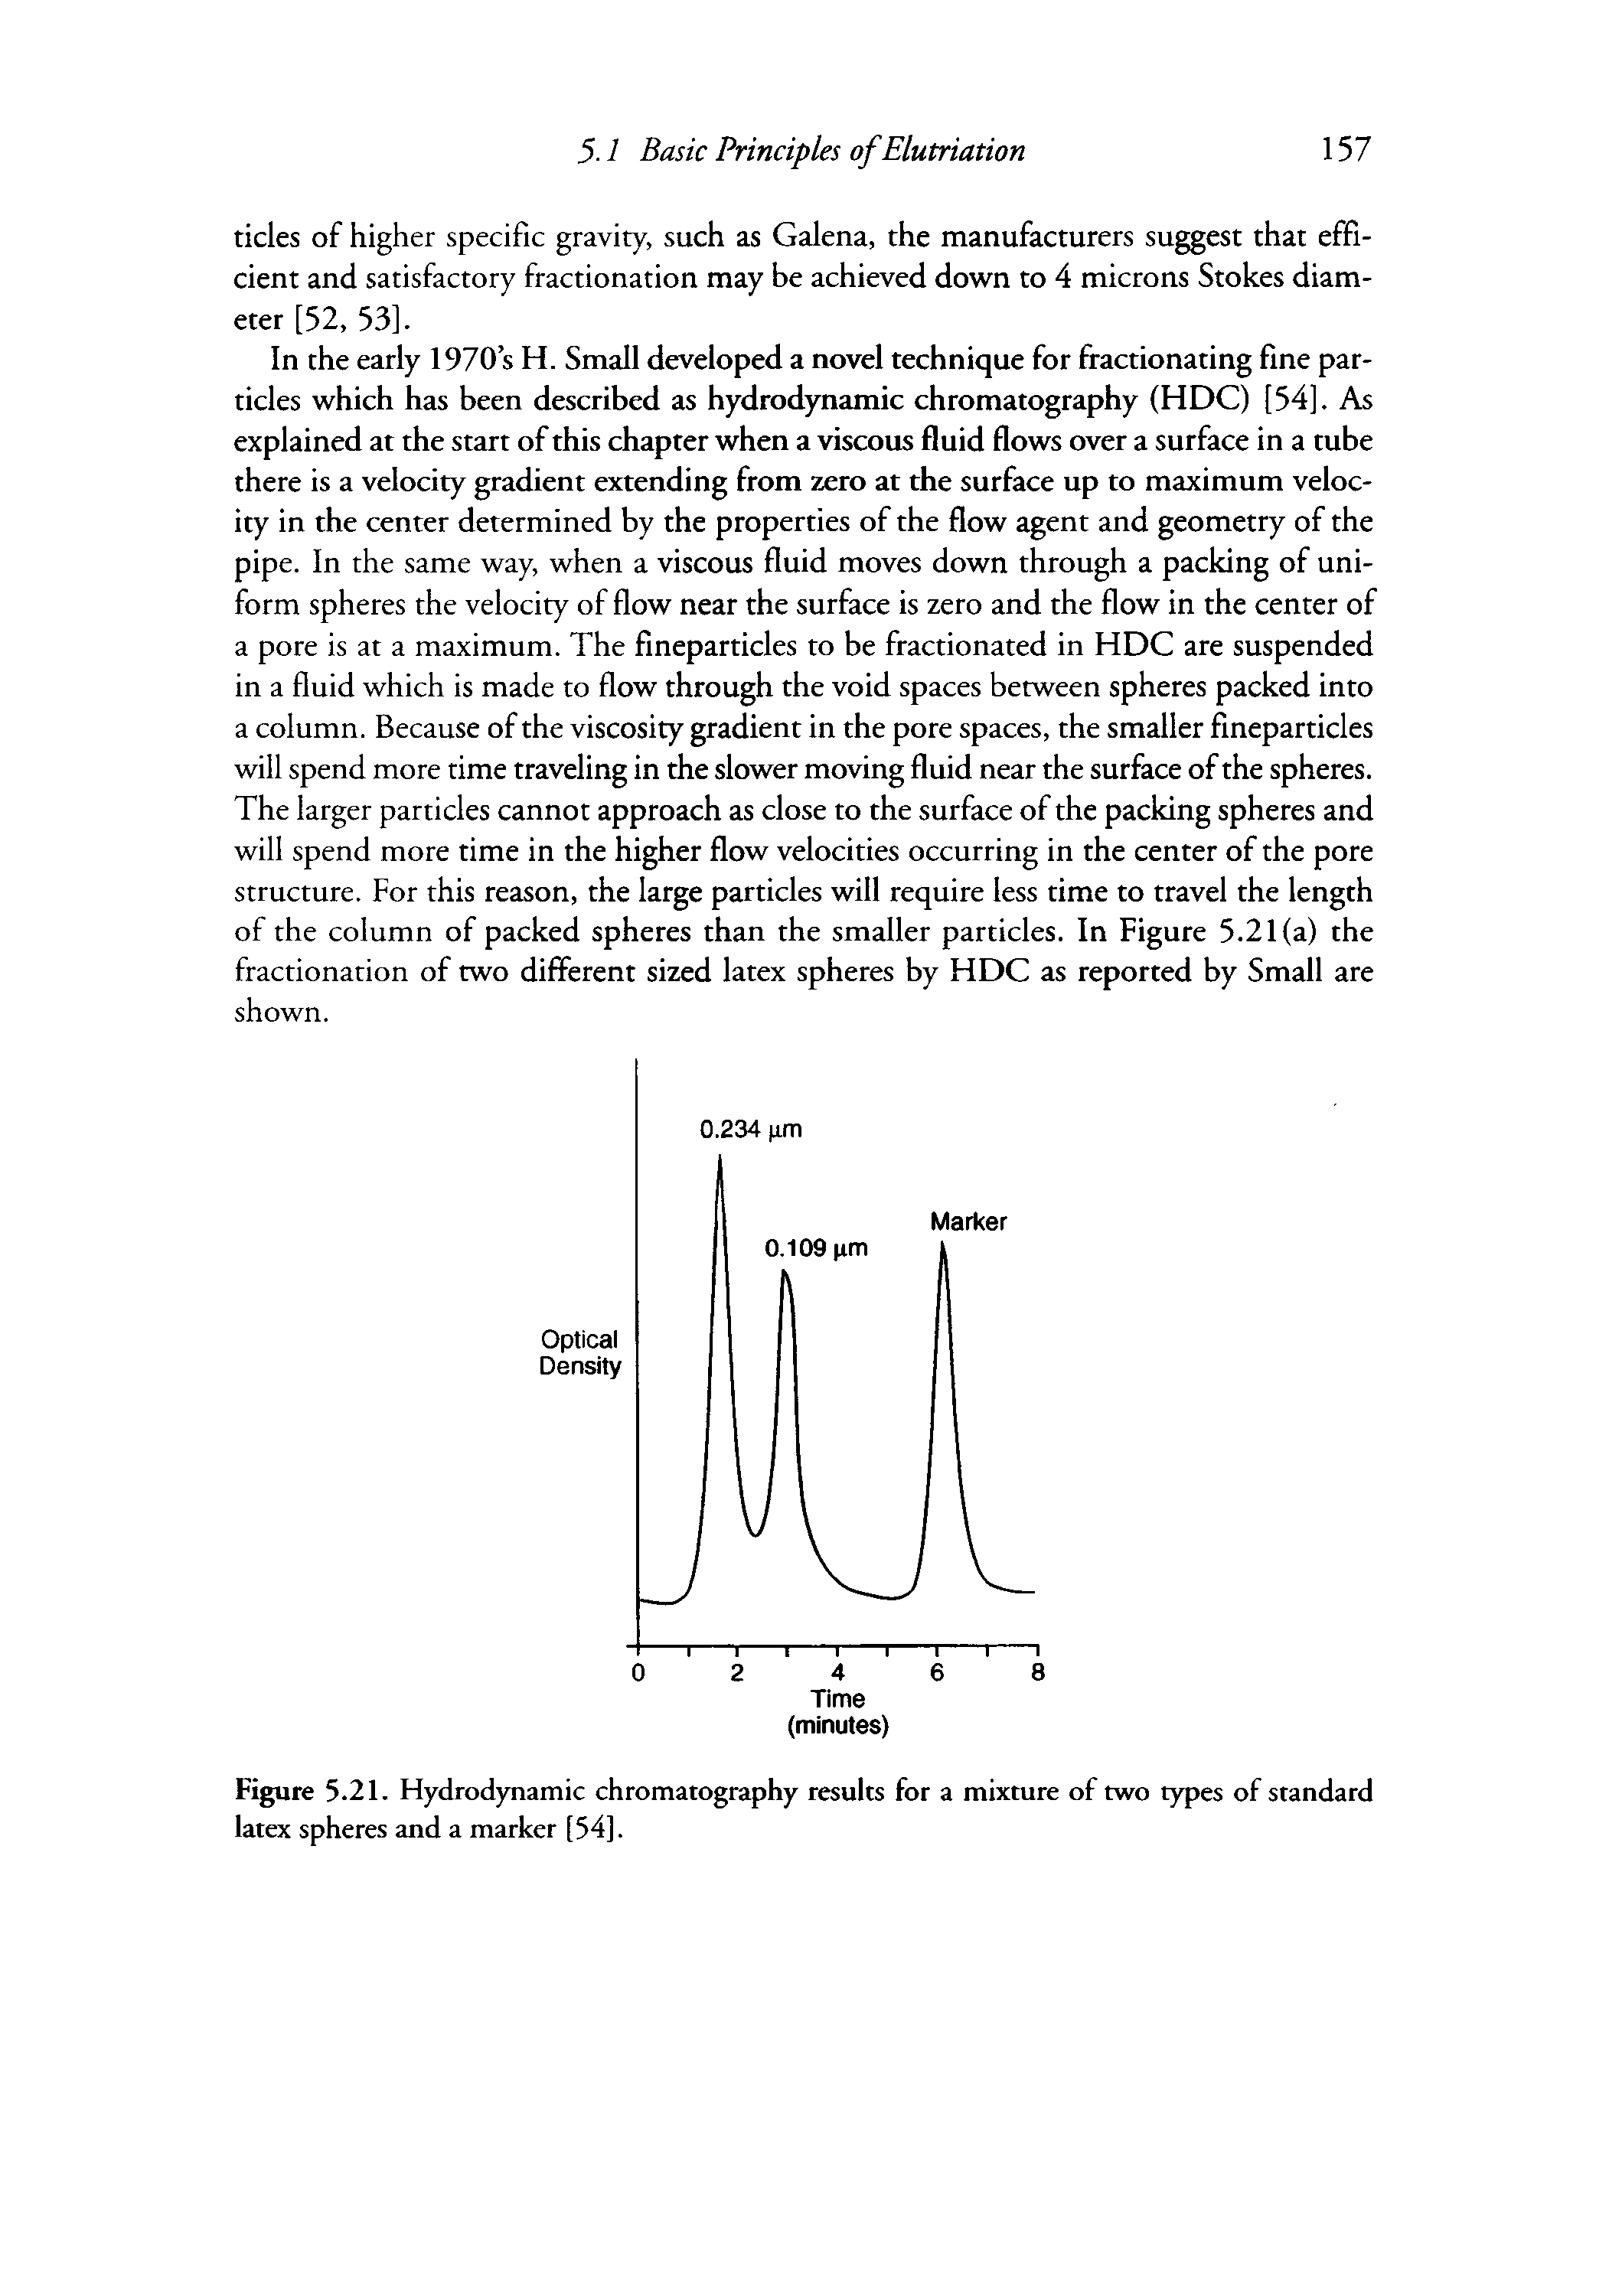 Figure 5.21. Hydrodynamic chromatography results for a mixture of two types of standard latex spheres and a marker [54].